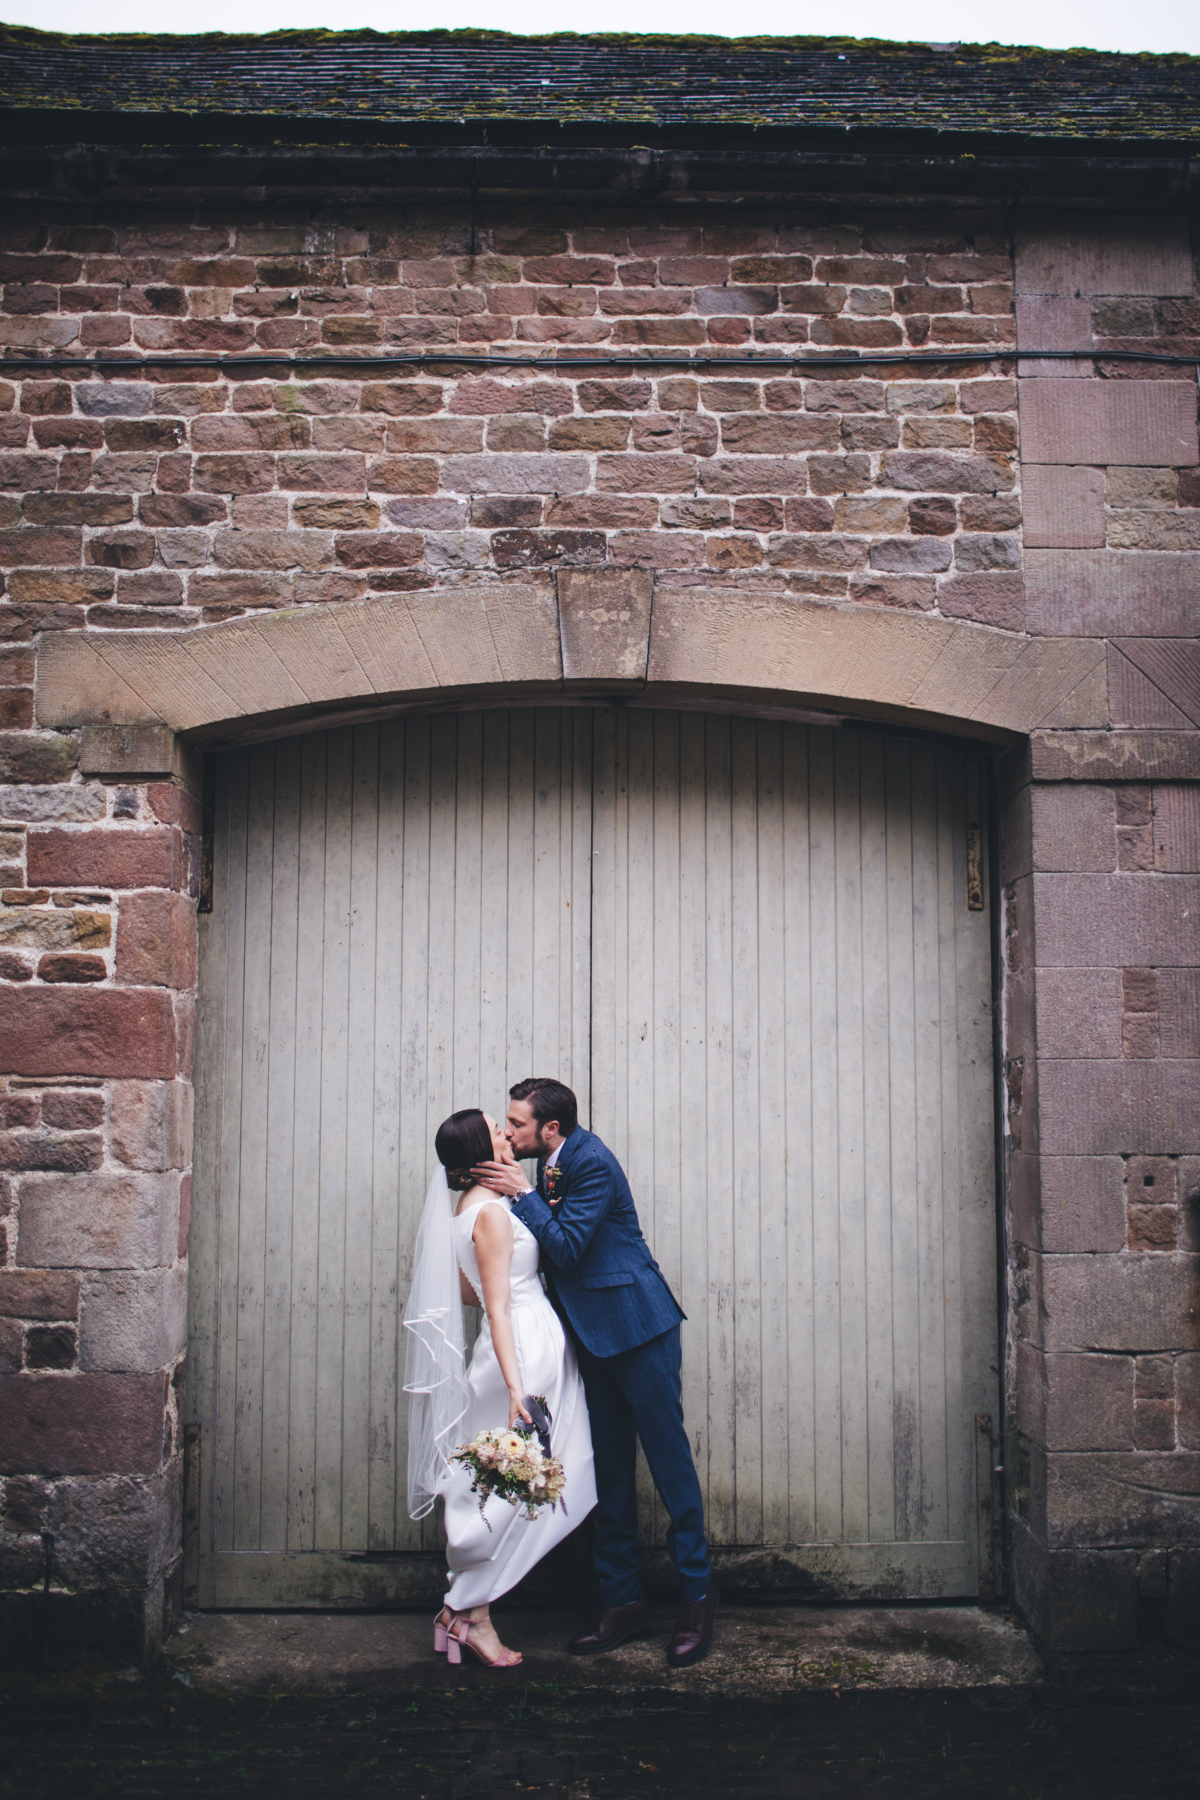 Bride and groom kiss in front of a large wooden doorway on a stone building